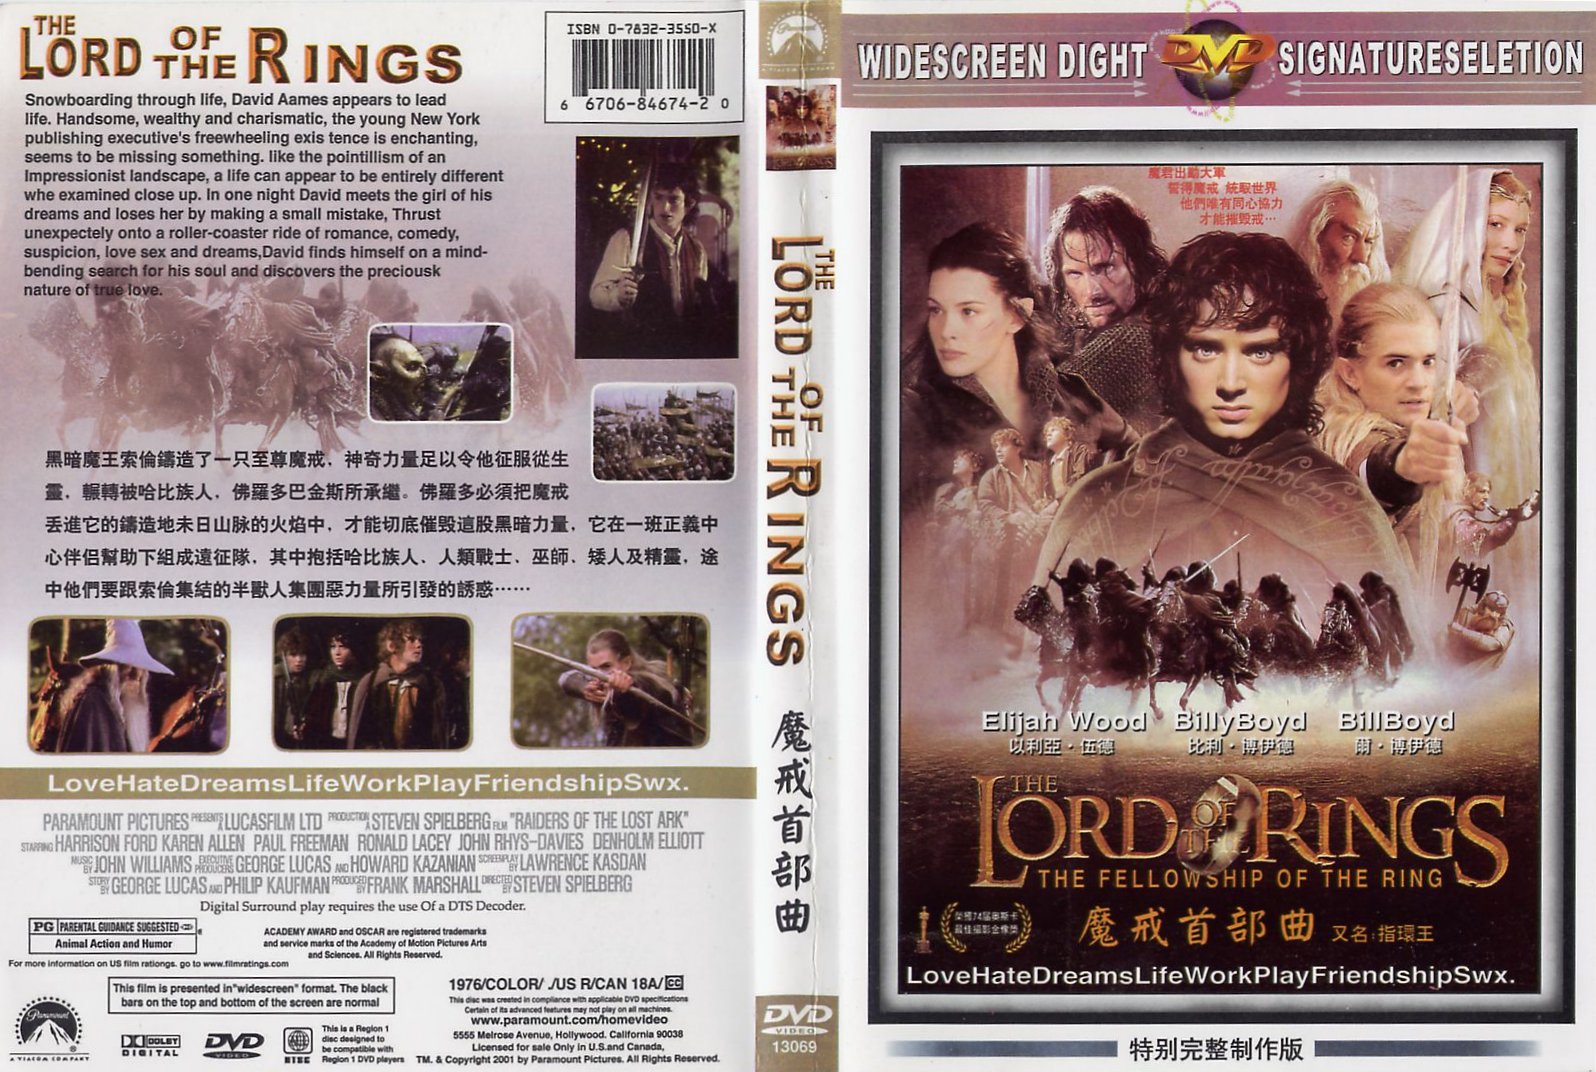 Lord of the Rings, Chinese